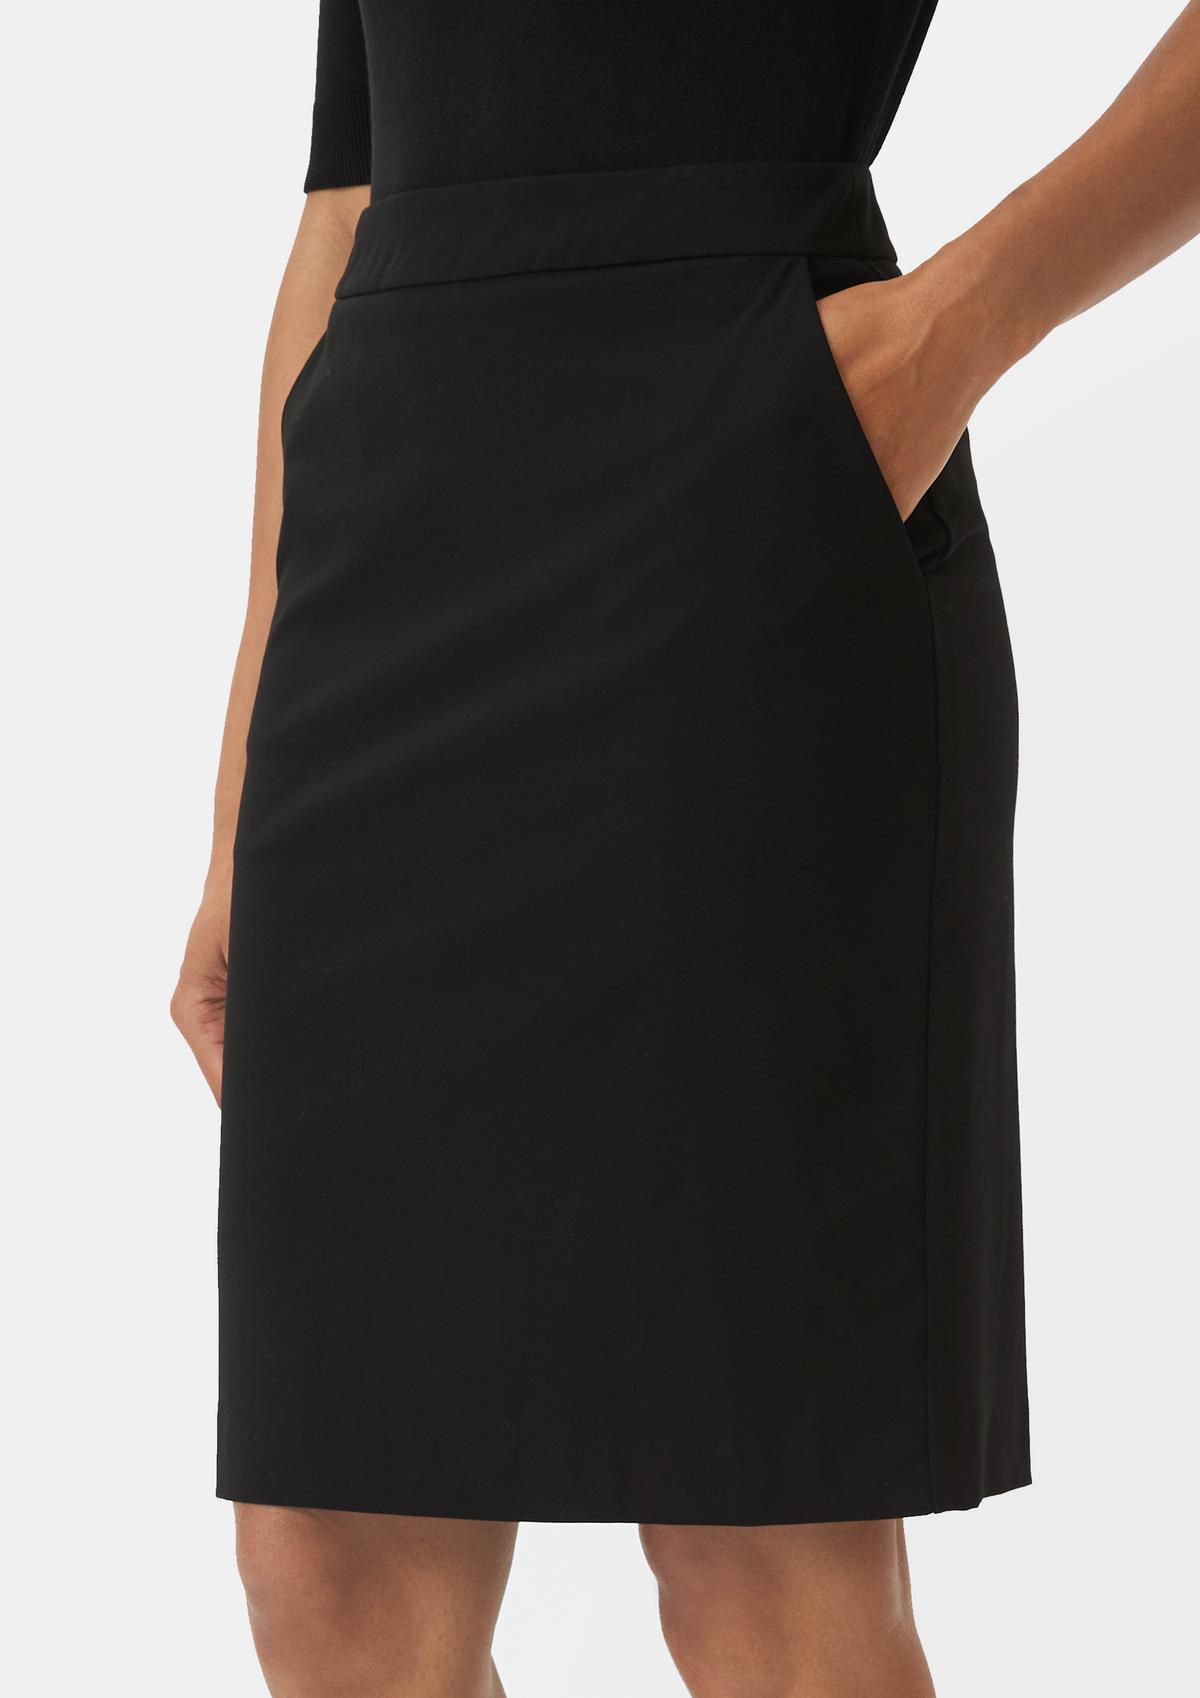 Skirt with side slits - navy | Comma